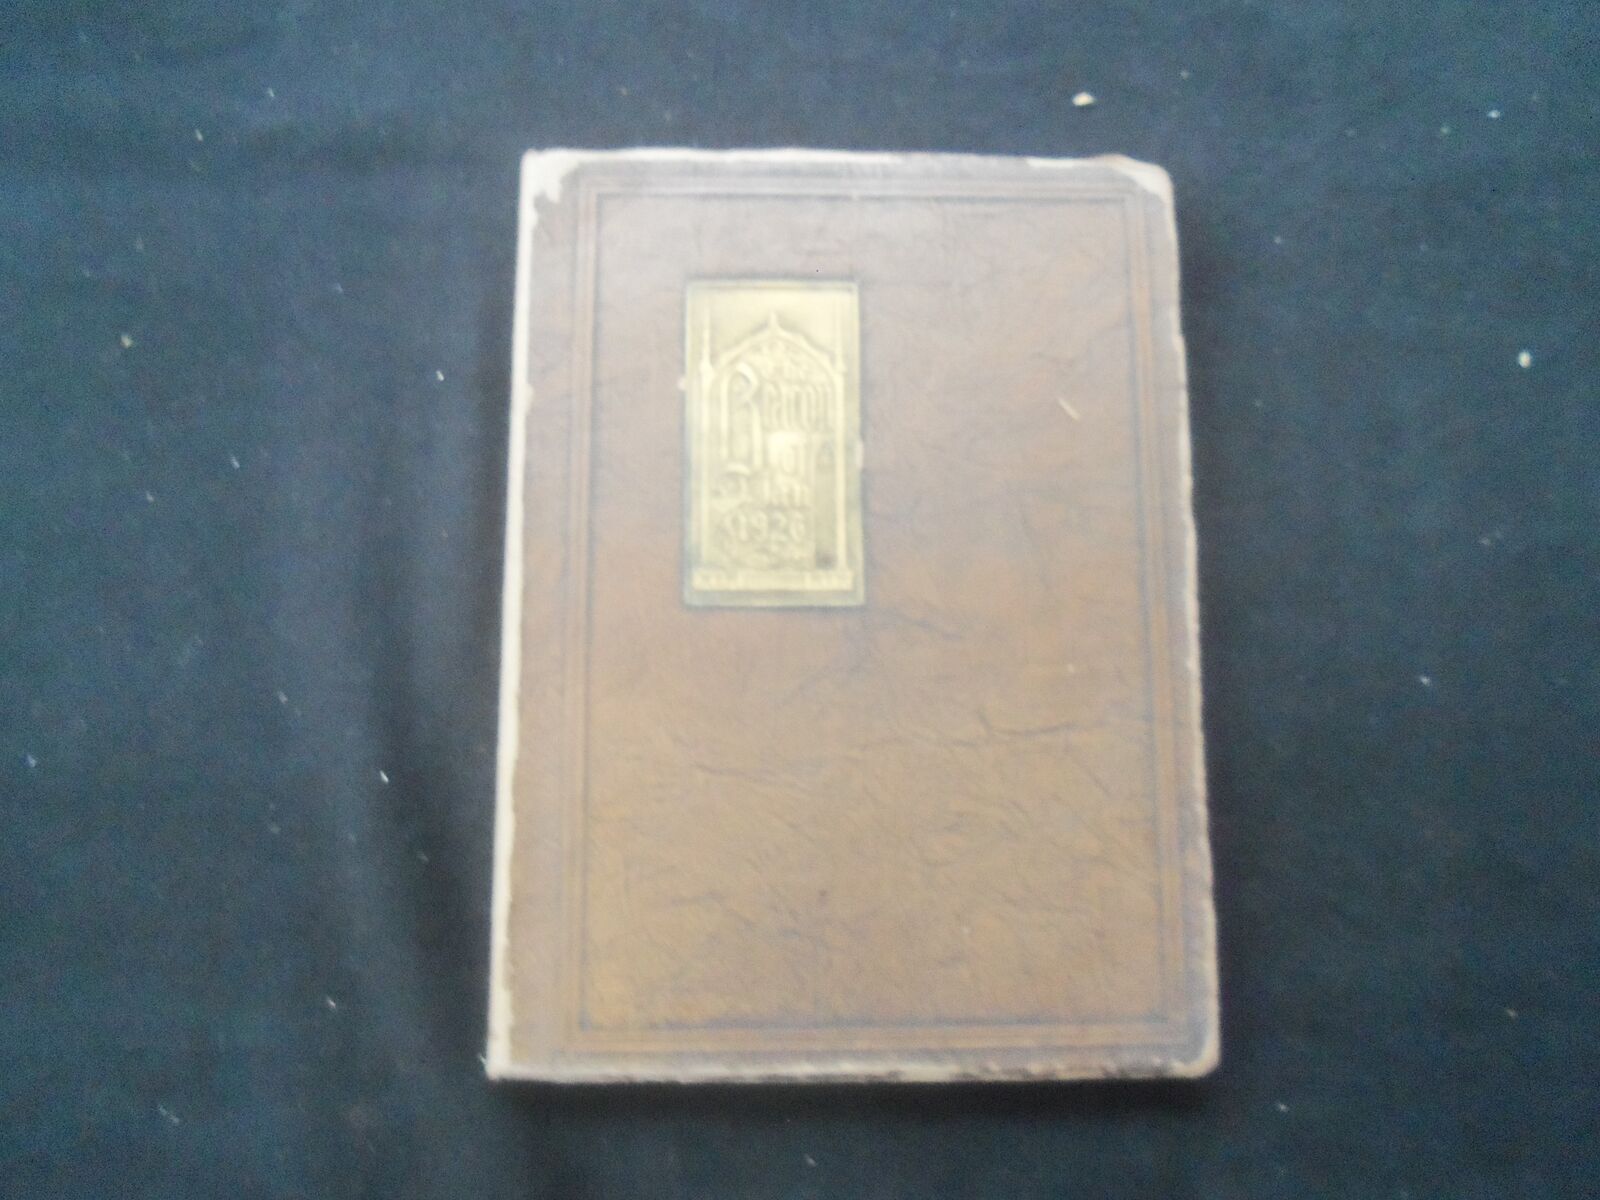 1926 THE BEACON GROVER CLEVELAND HIGH SCHOOL YEARBOOK - ST. LOUIS, MO - YB 2961